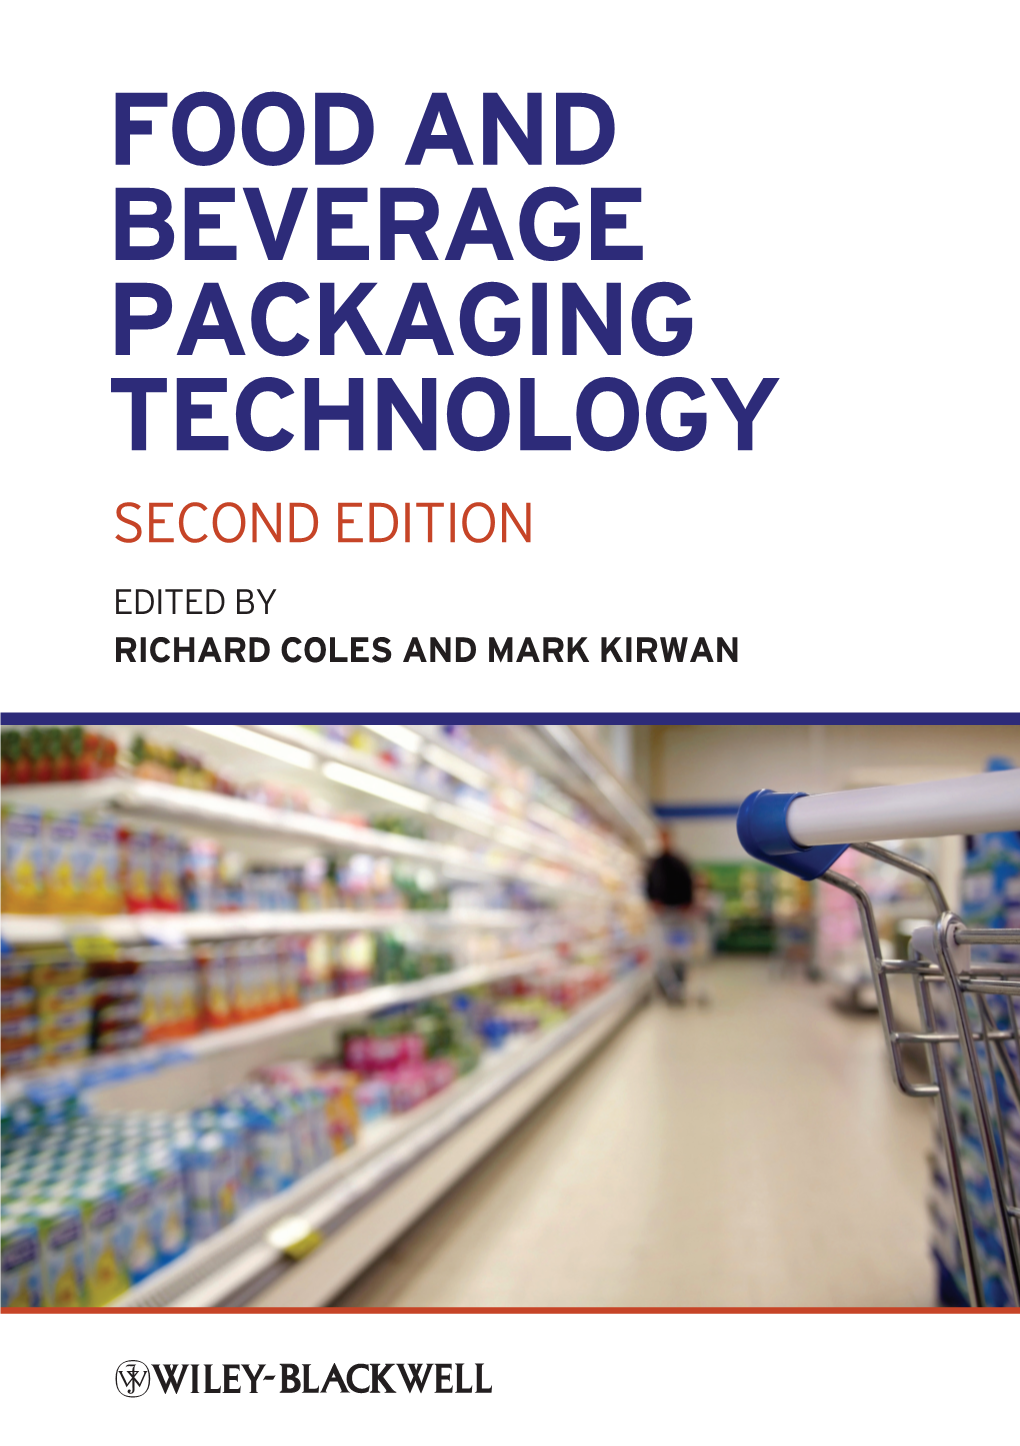 Food and Beverage Packaging Technology Second Edition Edited by Richard Coles and Mark Kirwan